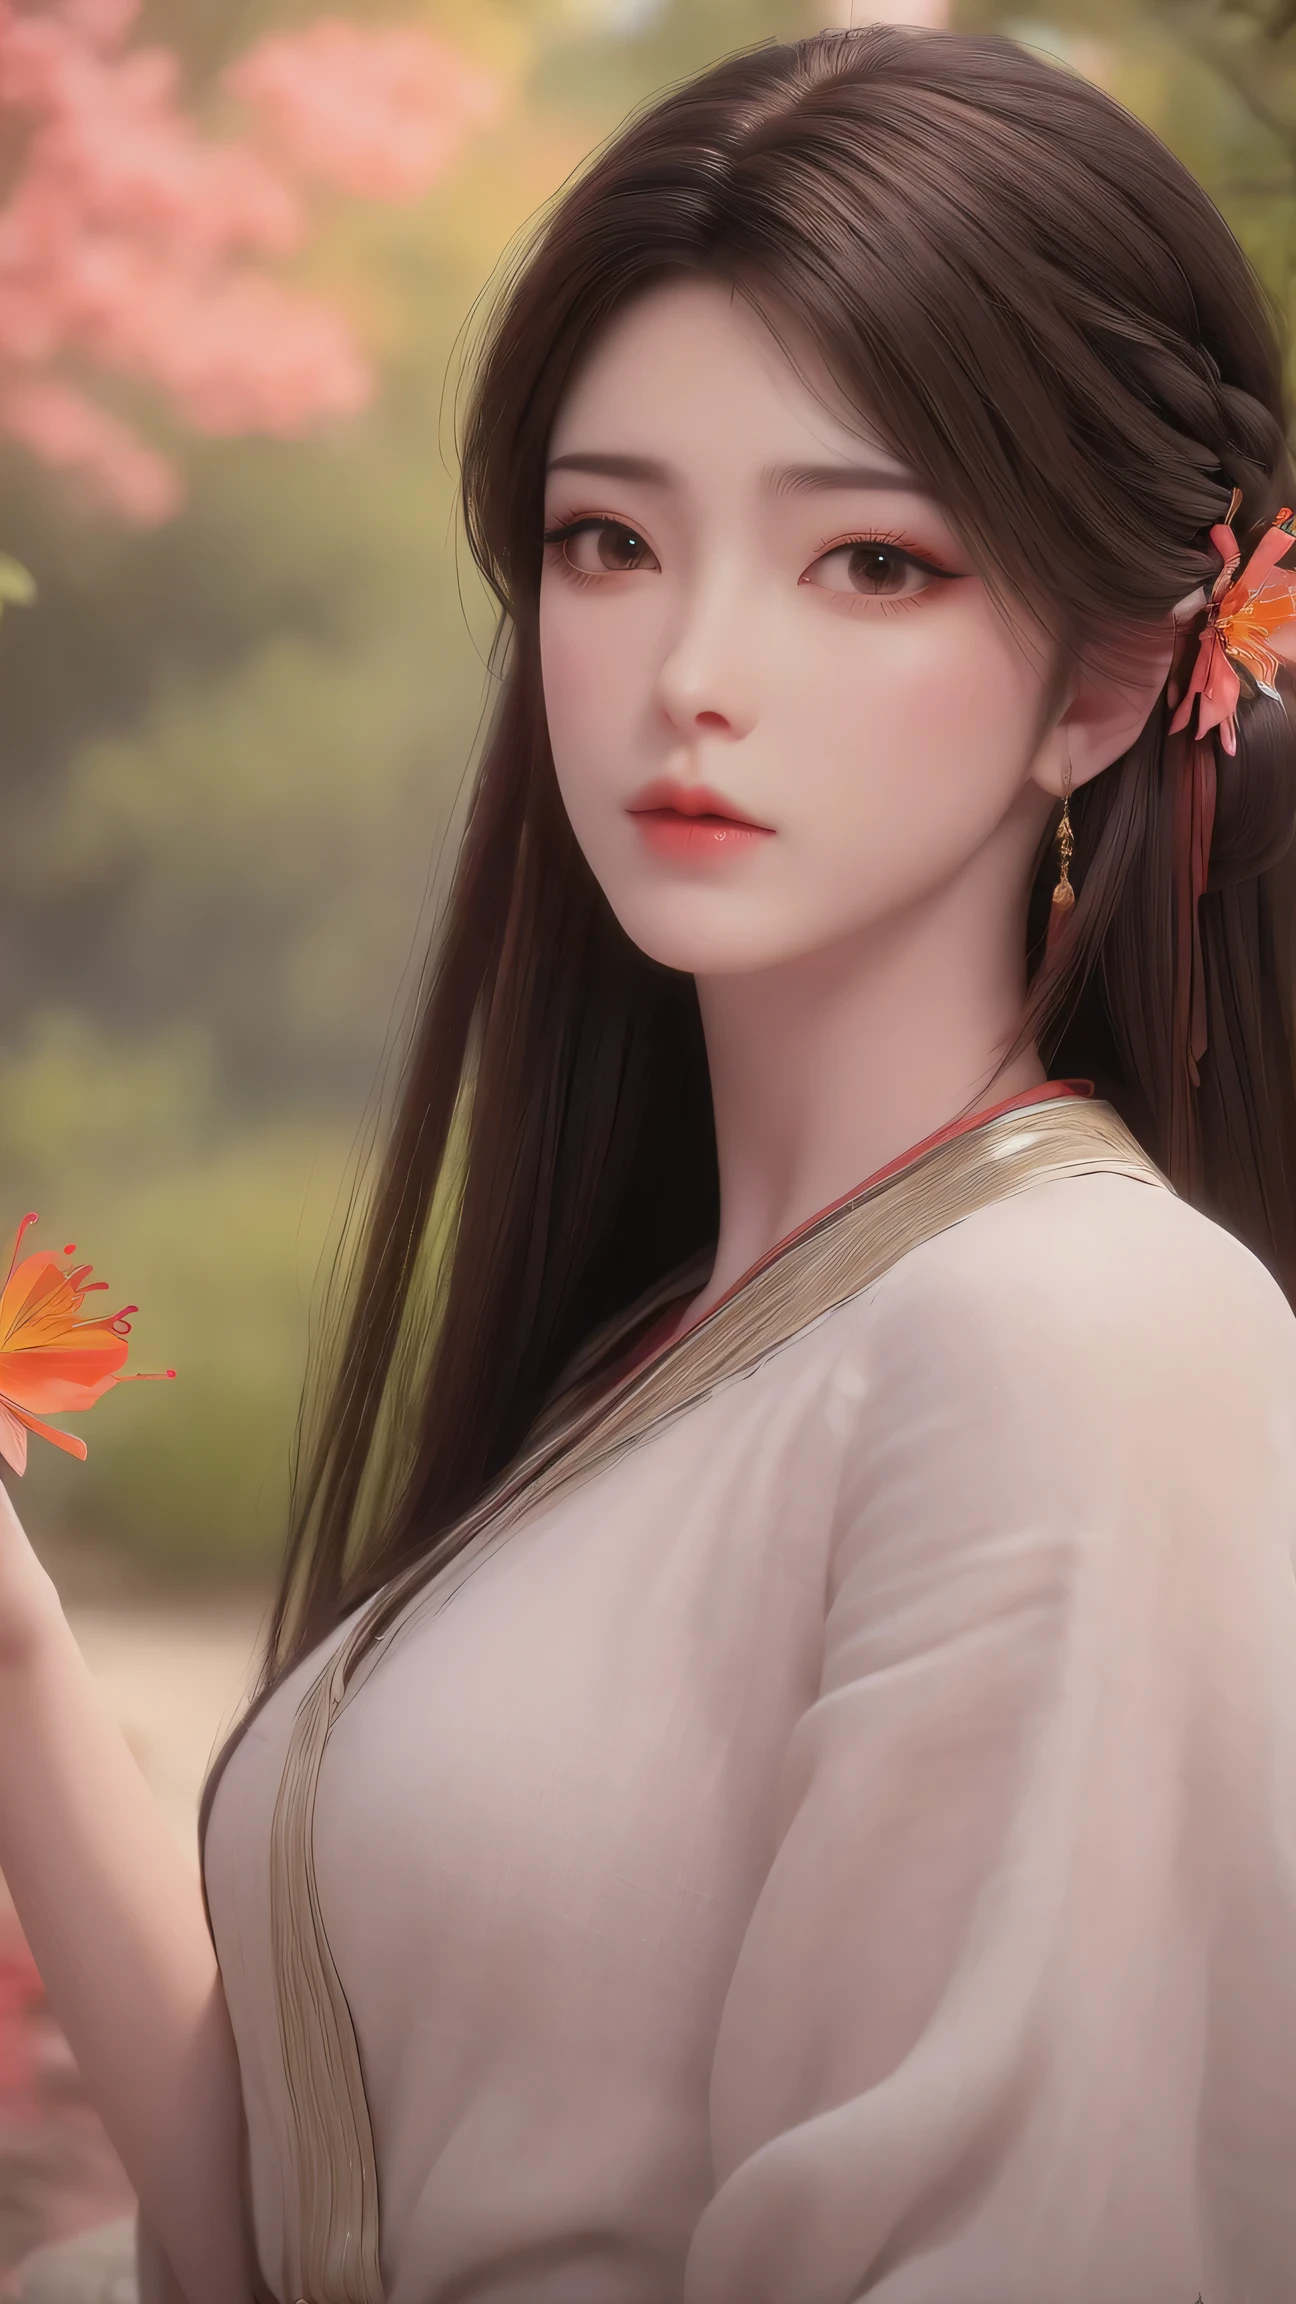 (best quality,ultra-detailed,photorealistic:1.37),vivid colors,studio lighting,beautiful detailed eyes,beautiful detailed lips,extremely detailed eyes and face,long eyelashes,portraits,black hair,confident expression,feminine,standing in a garden,soft sunlight, scenery,flower blossoms,peaceful atmosphere,artistic touch,textured brushstrokes,subtle color variations,brilliant white highlights,delicate movements,graceful pose,slight breeze,rustling leaves,sophisticated style,professional artwork,female beauty.